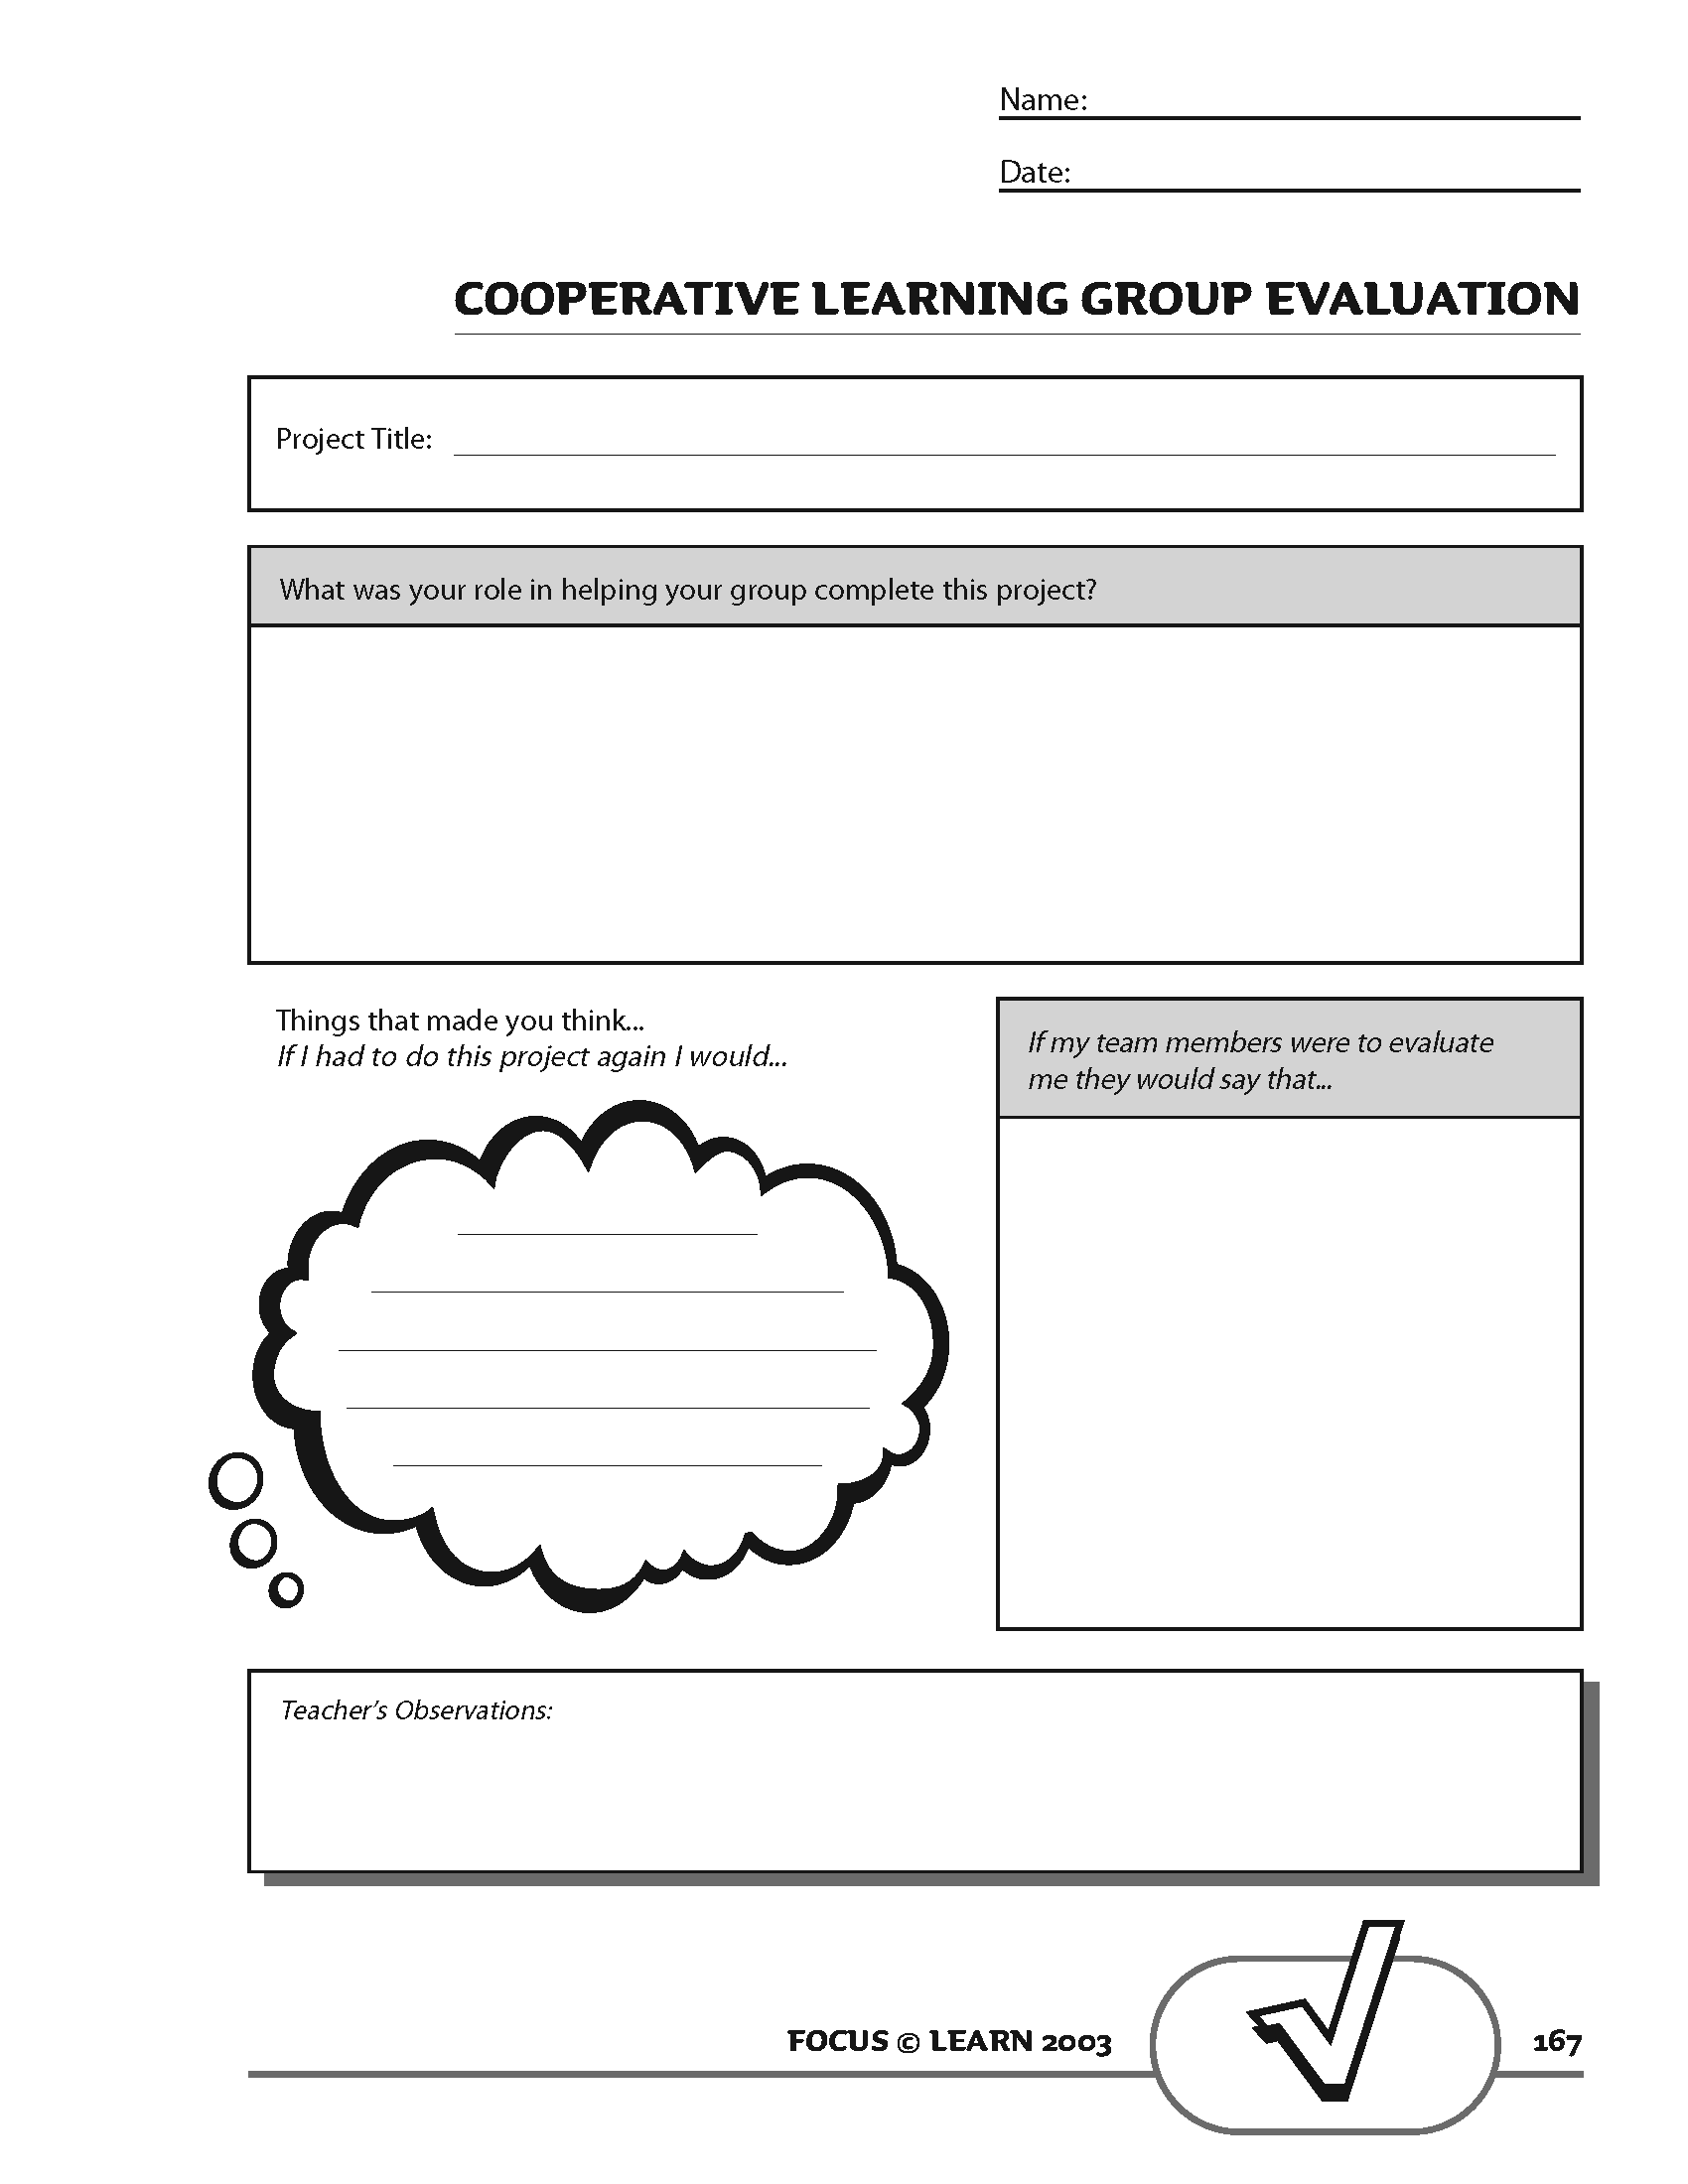 Cooperative Learning Group Evaluation Tool